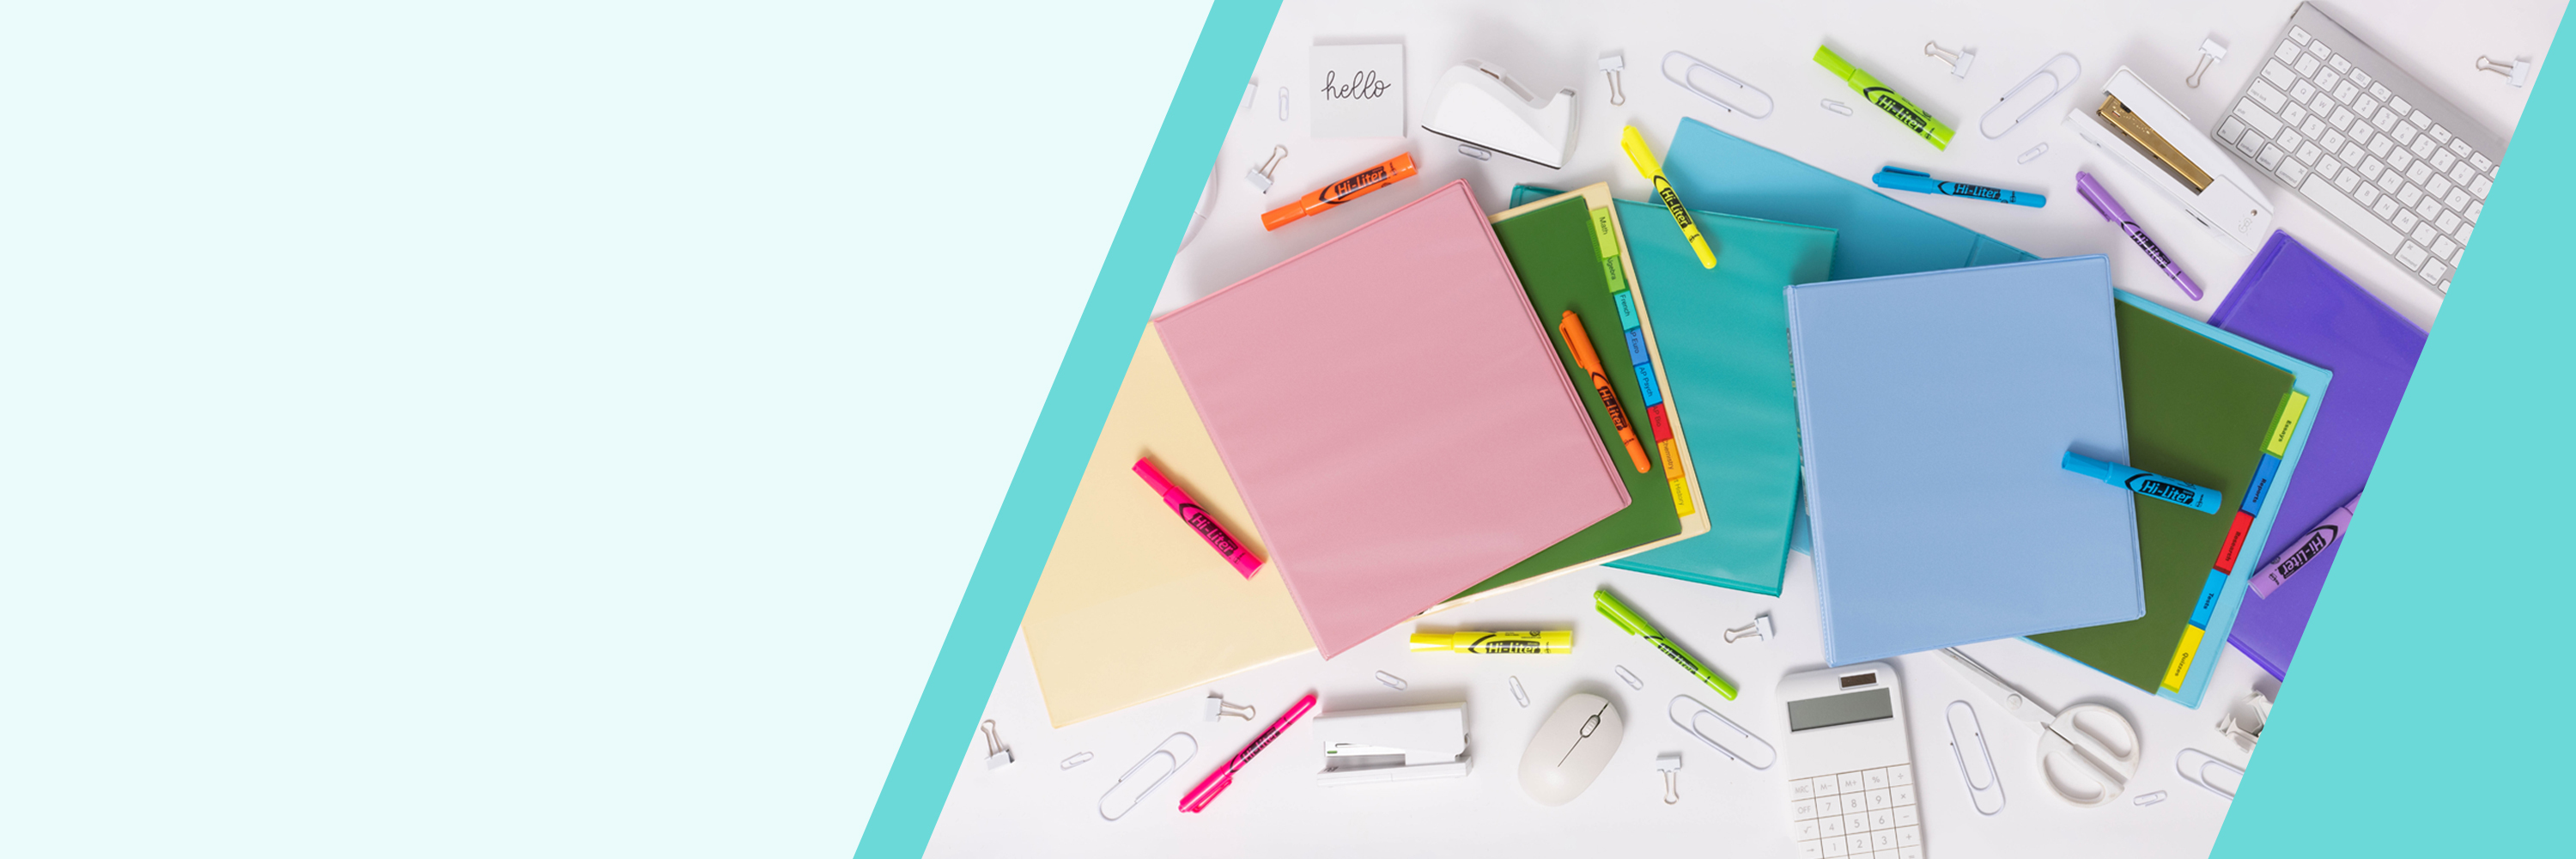 Flatlay image of a group of colorful pink, blue, and green binders in different shades, spread out on a white surface, surrounded by various school supplies, like highlighters in multiple colors, and white staplers, tape dispensers, paper clips and alligator clips